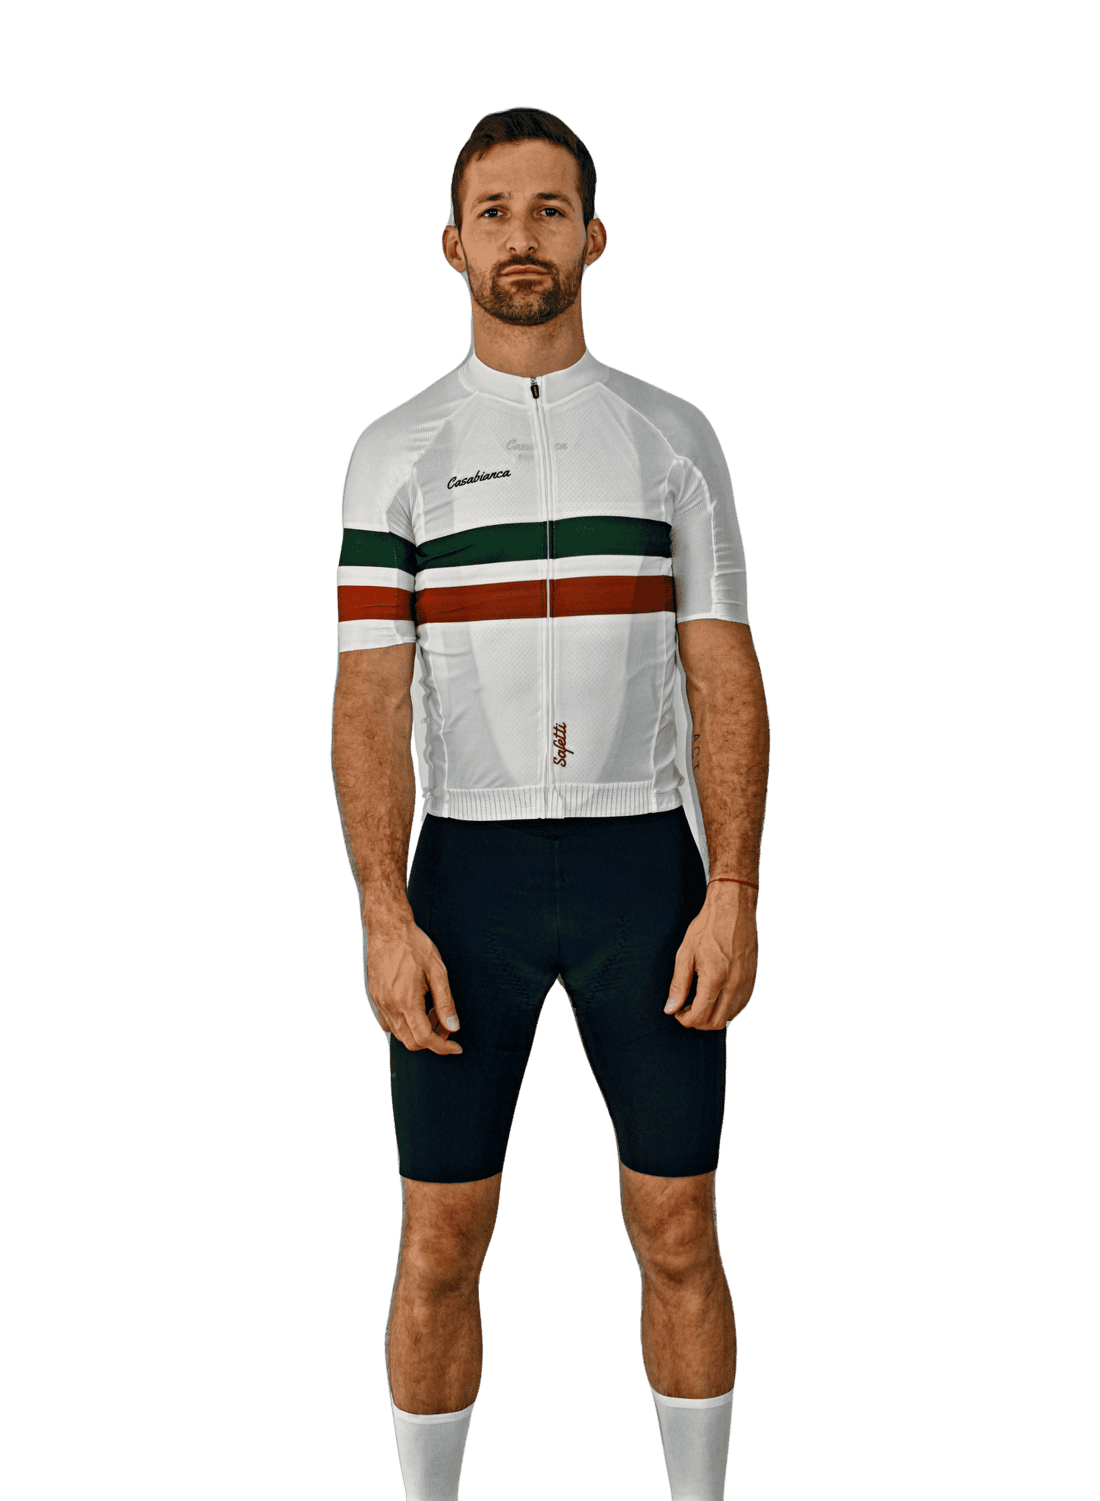 Men's Olive & Leather Stripes | Casabianca Cycling Apparel